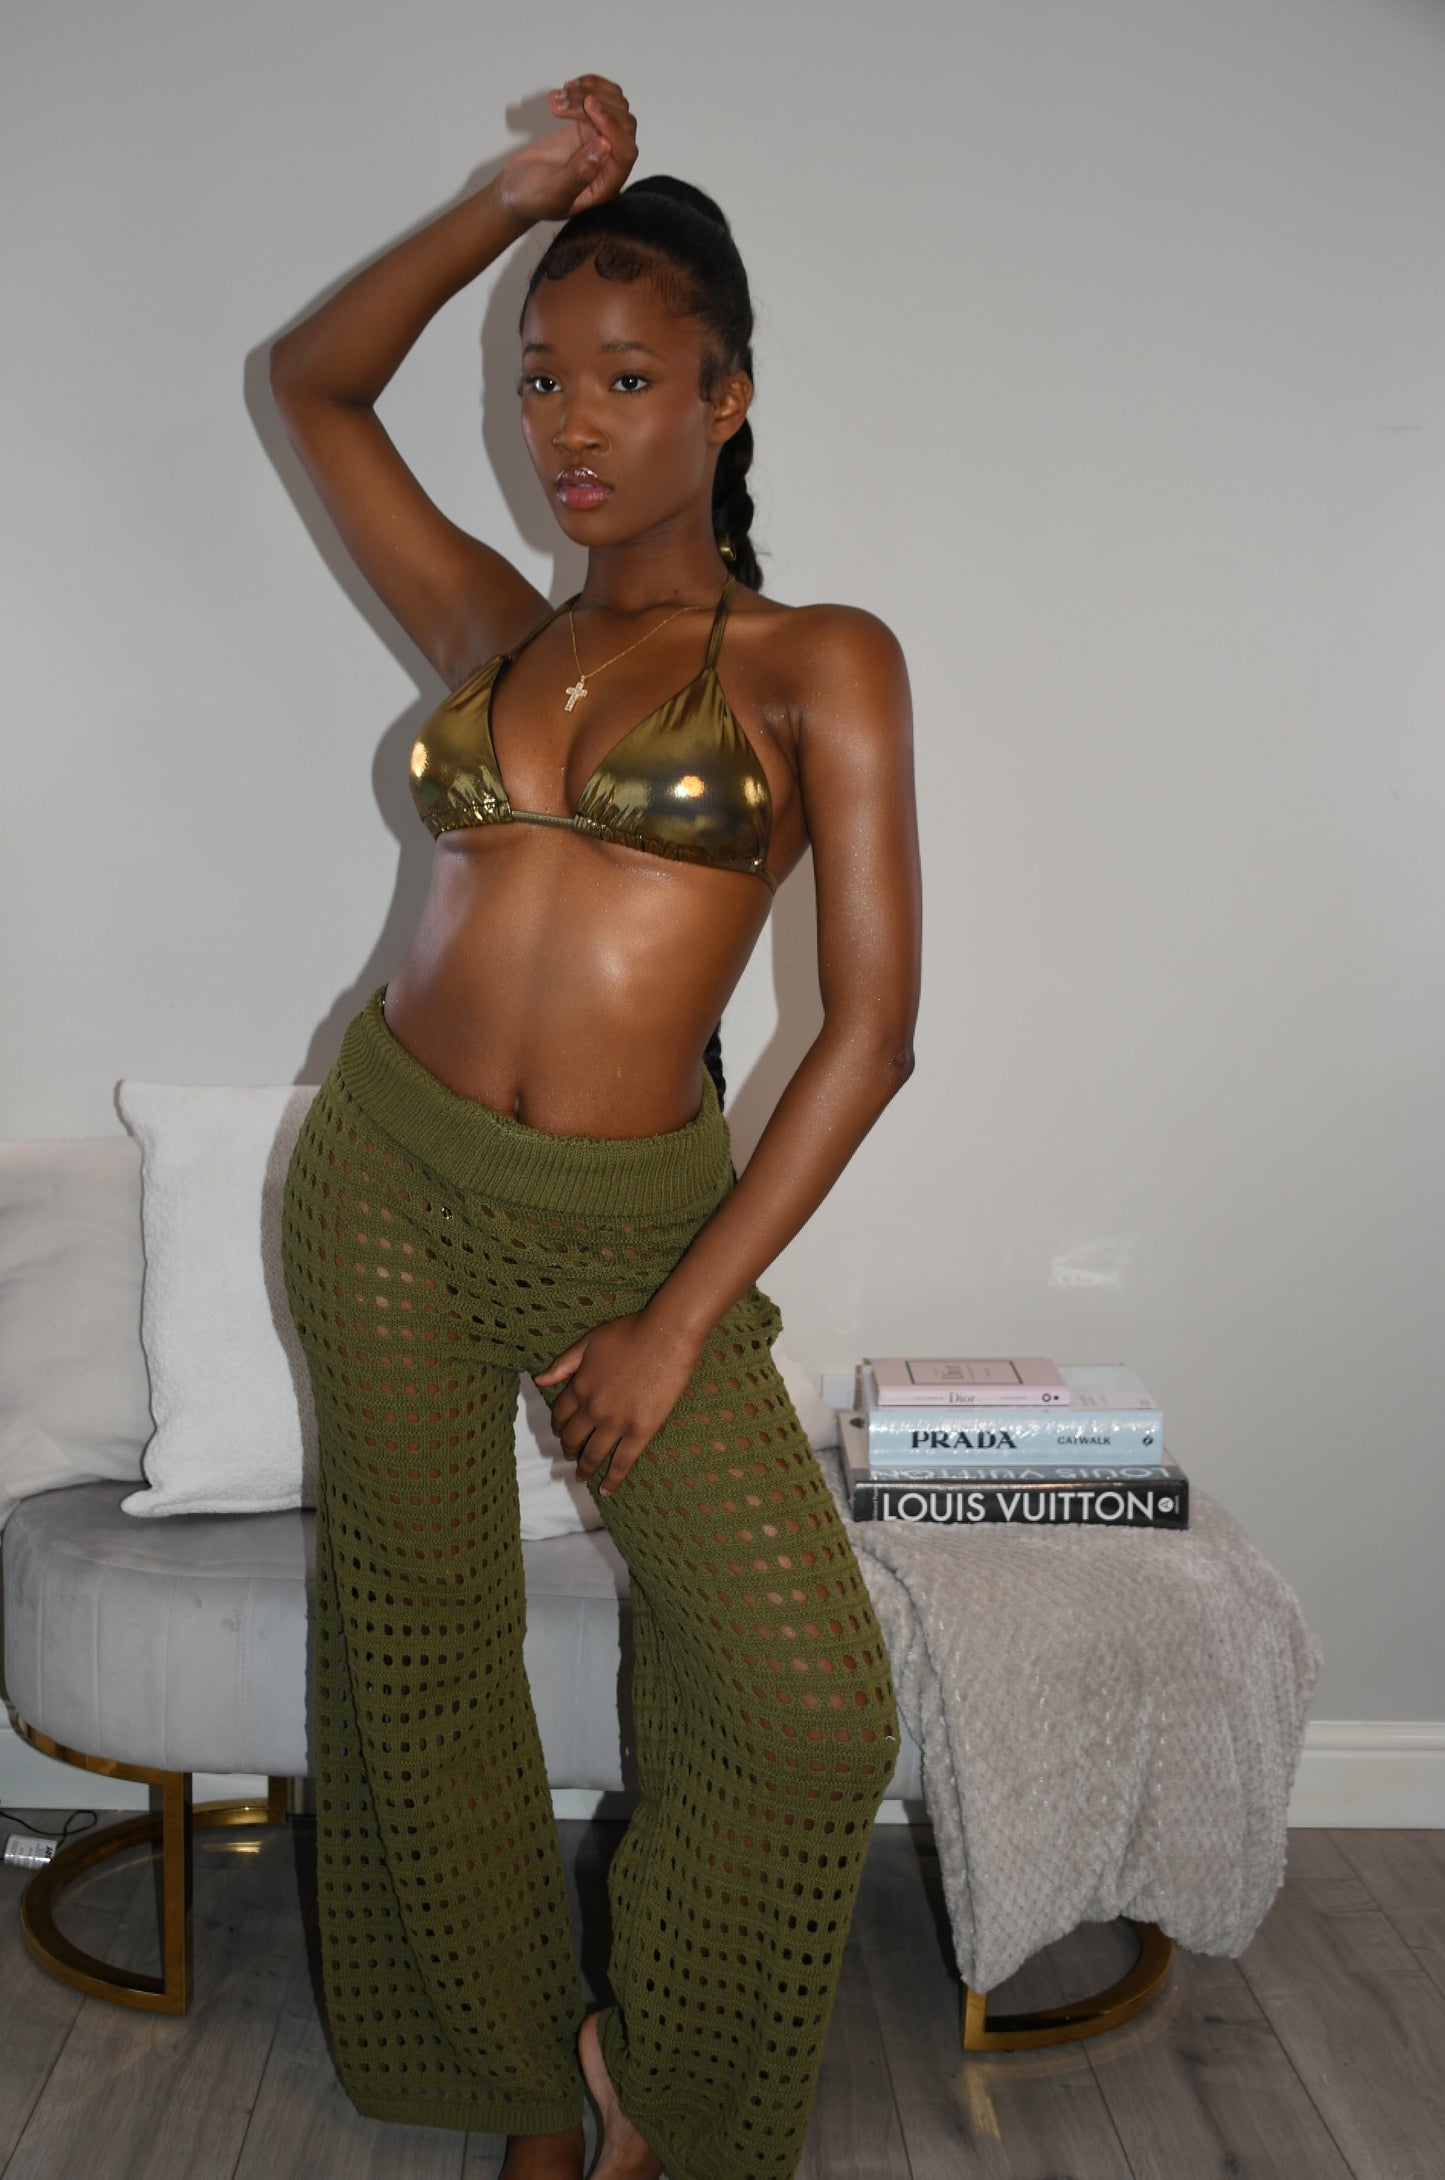 Khaki crochet trousers and long sleeved crop top co-ord